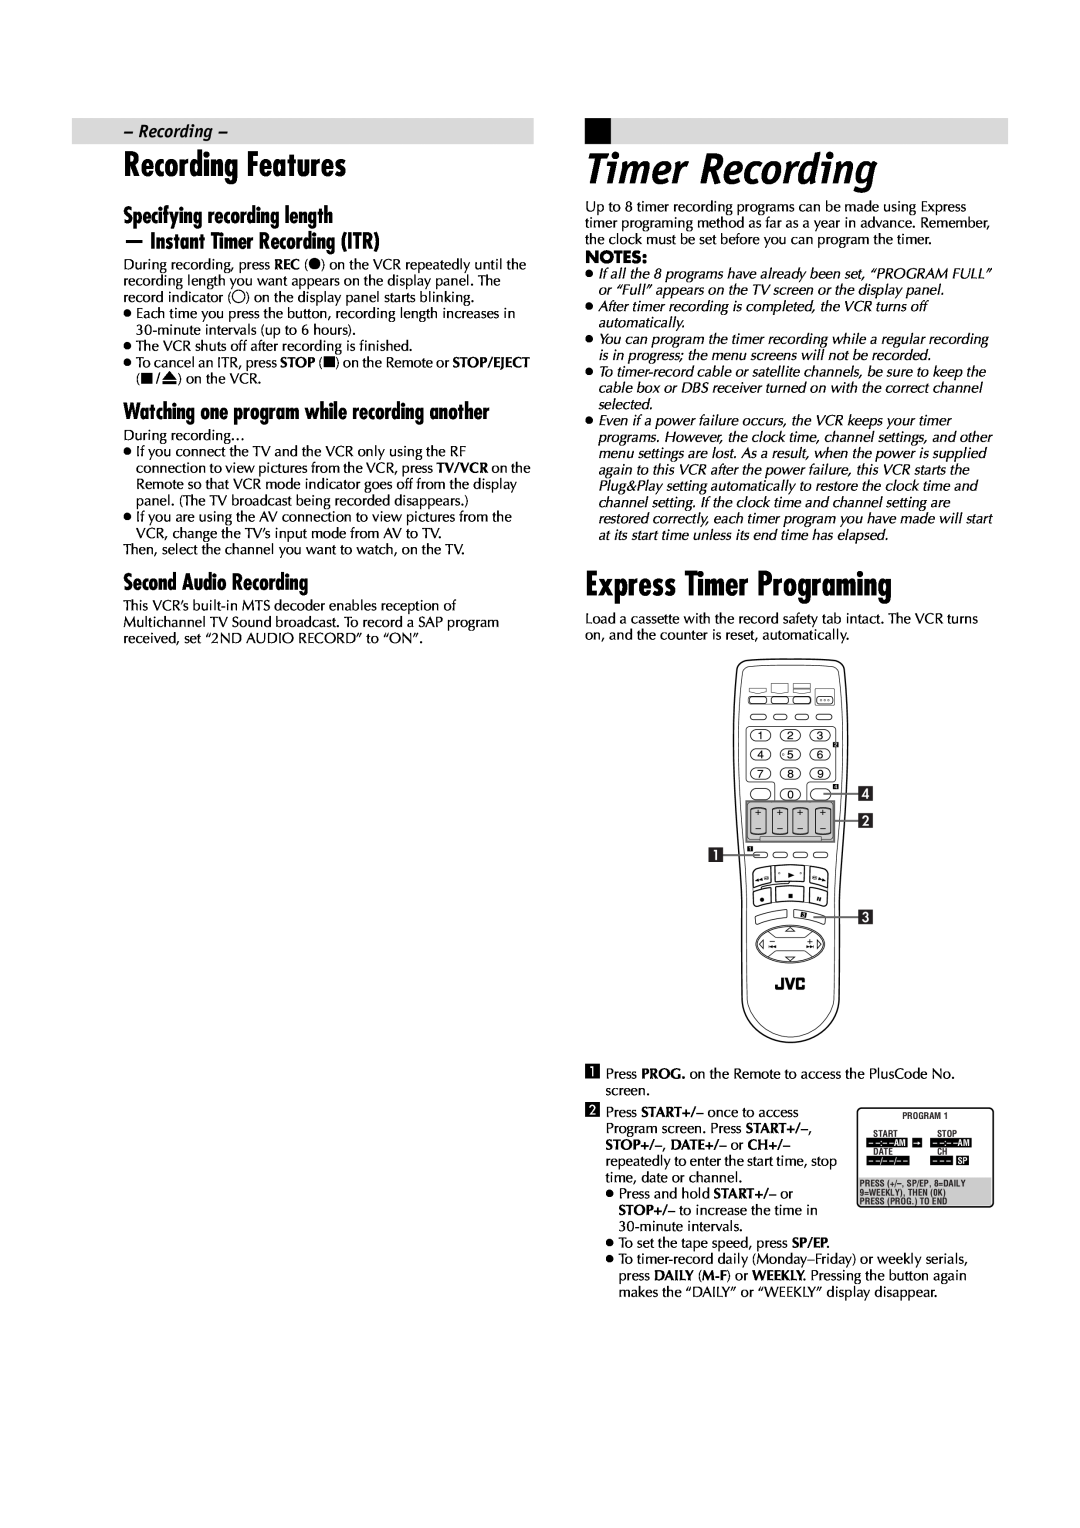 JVC HR-A5U Timer Recording, Recording Features, Express Timer Programing, Second Audio Recording, STOP+/-, DATE+/- or CH+ 